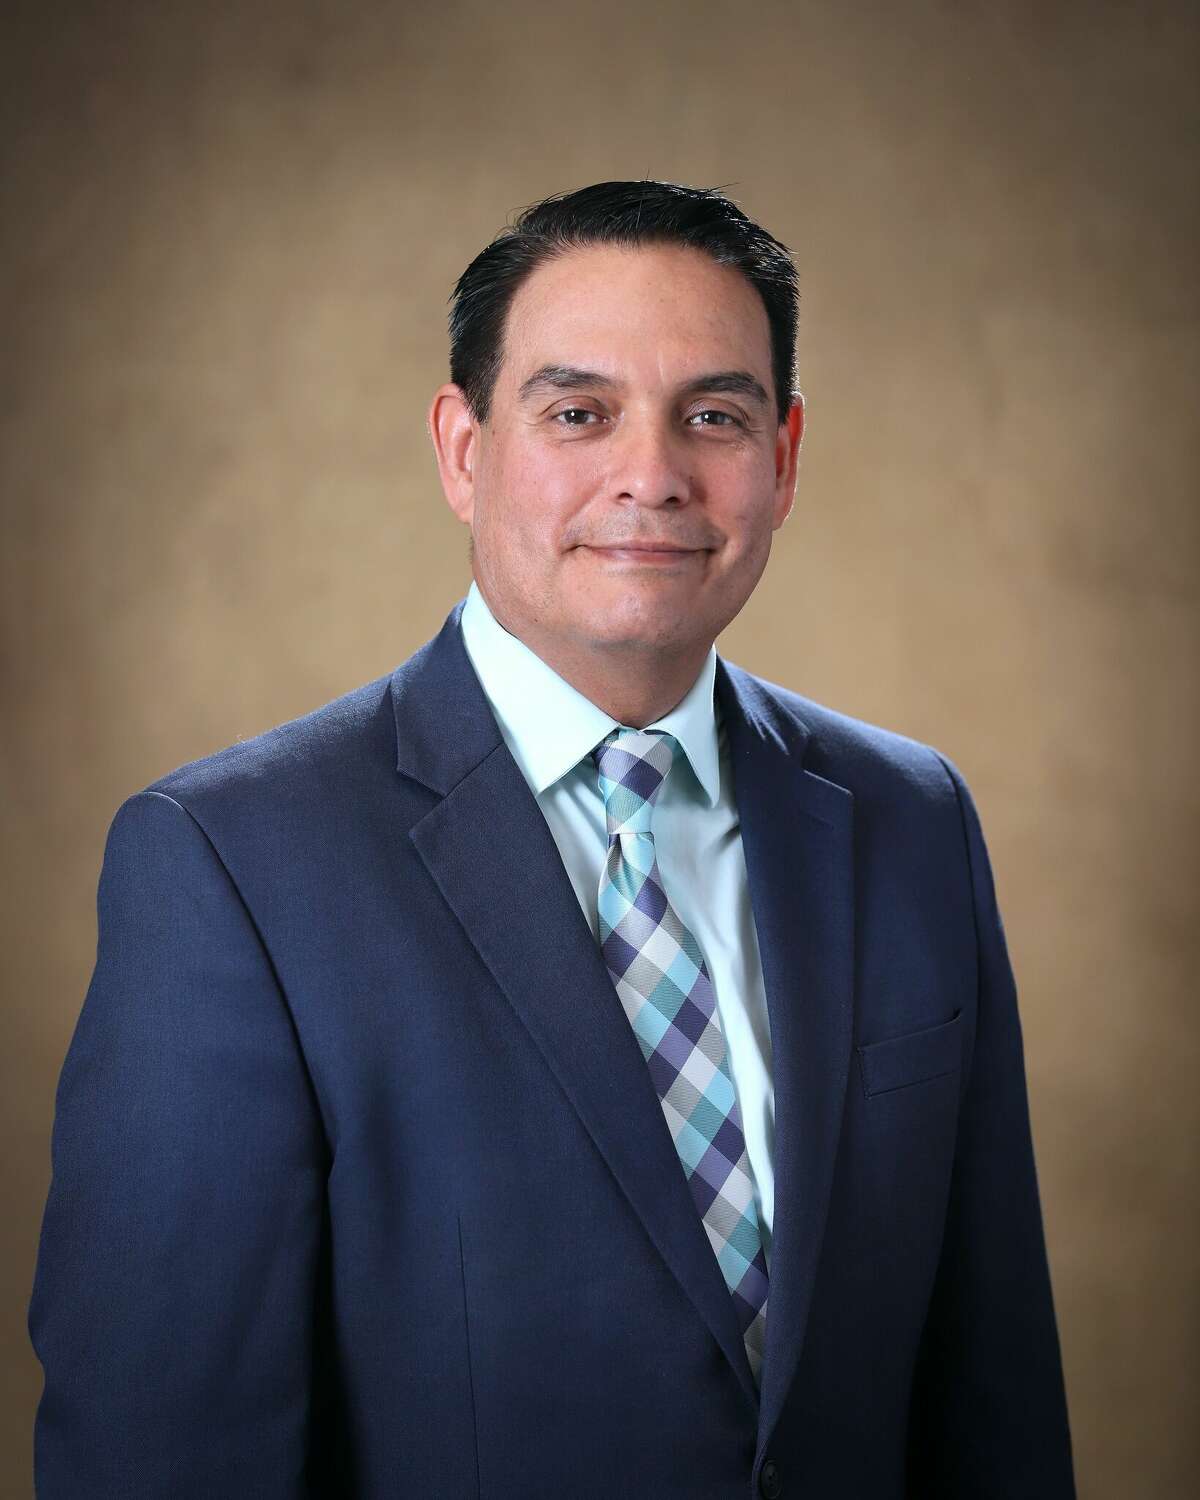 Rob Vasquez was announced as the Chief Operating Officer of Doctors Hospital of Laredo on Monday, Aug. 22, 2022.